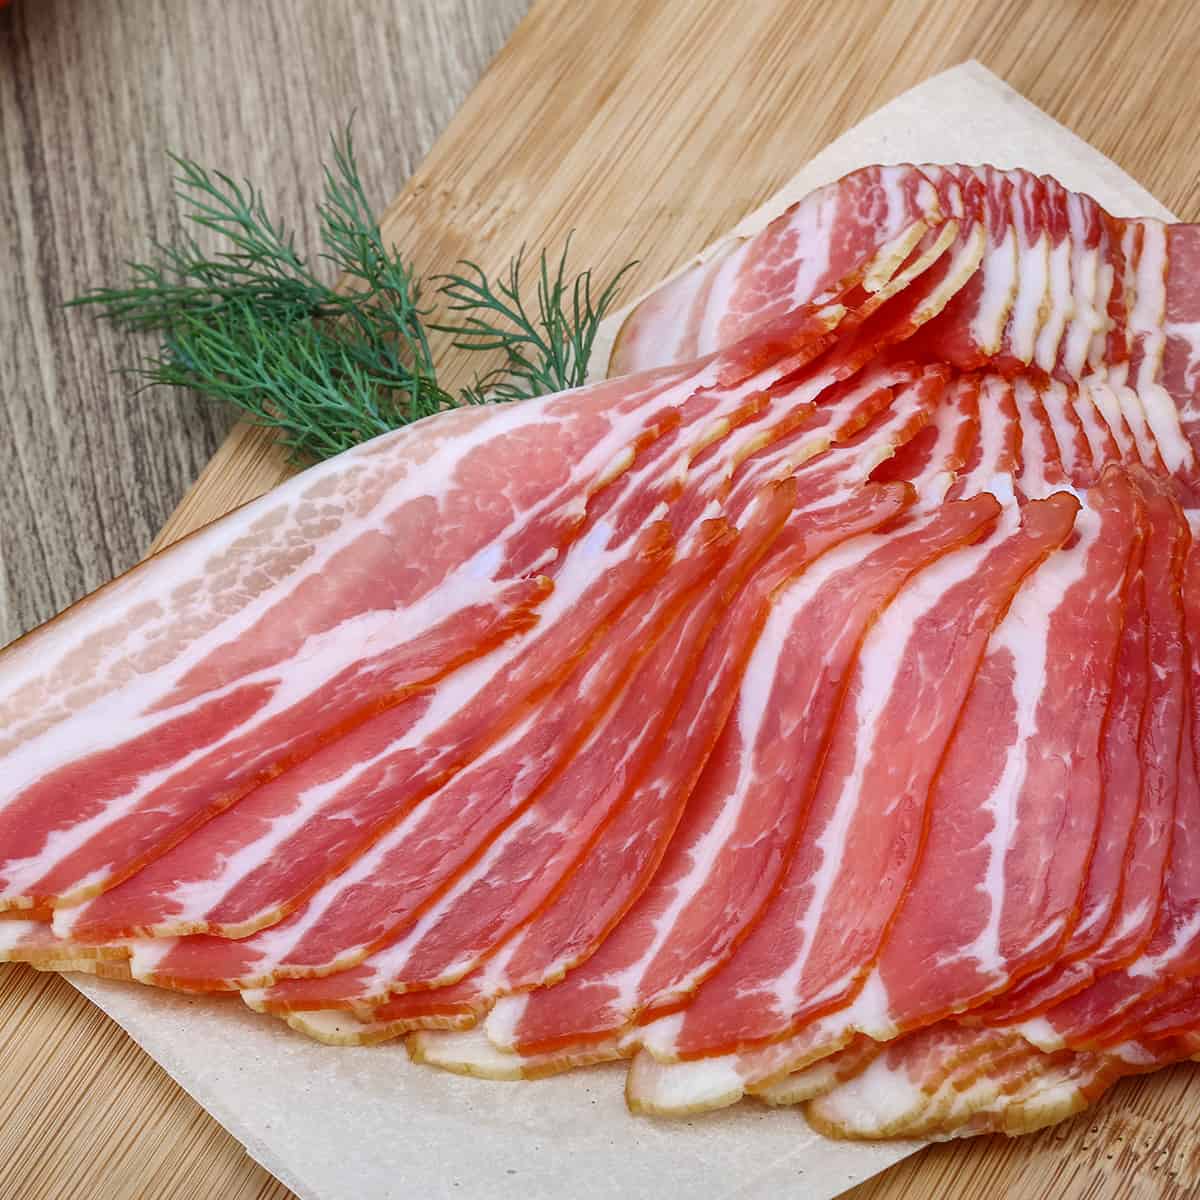 How to Store Bacon in Your Pantry & Freezer